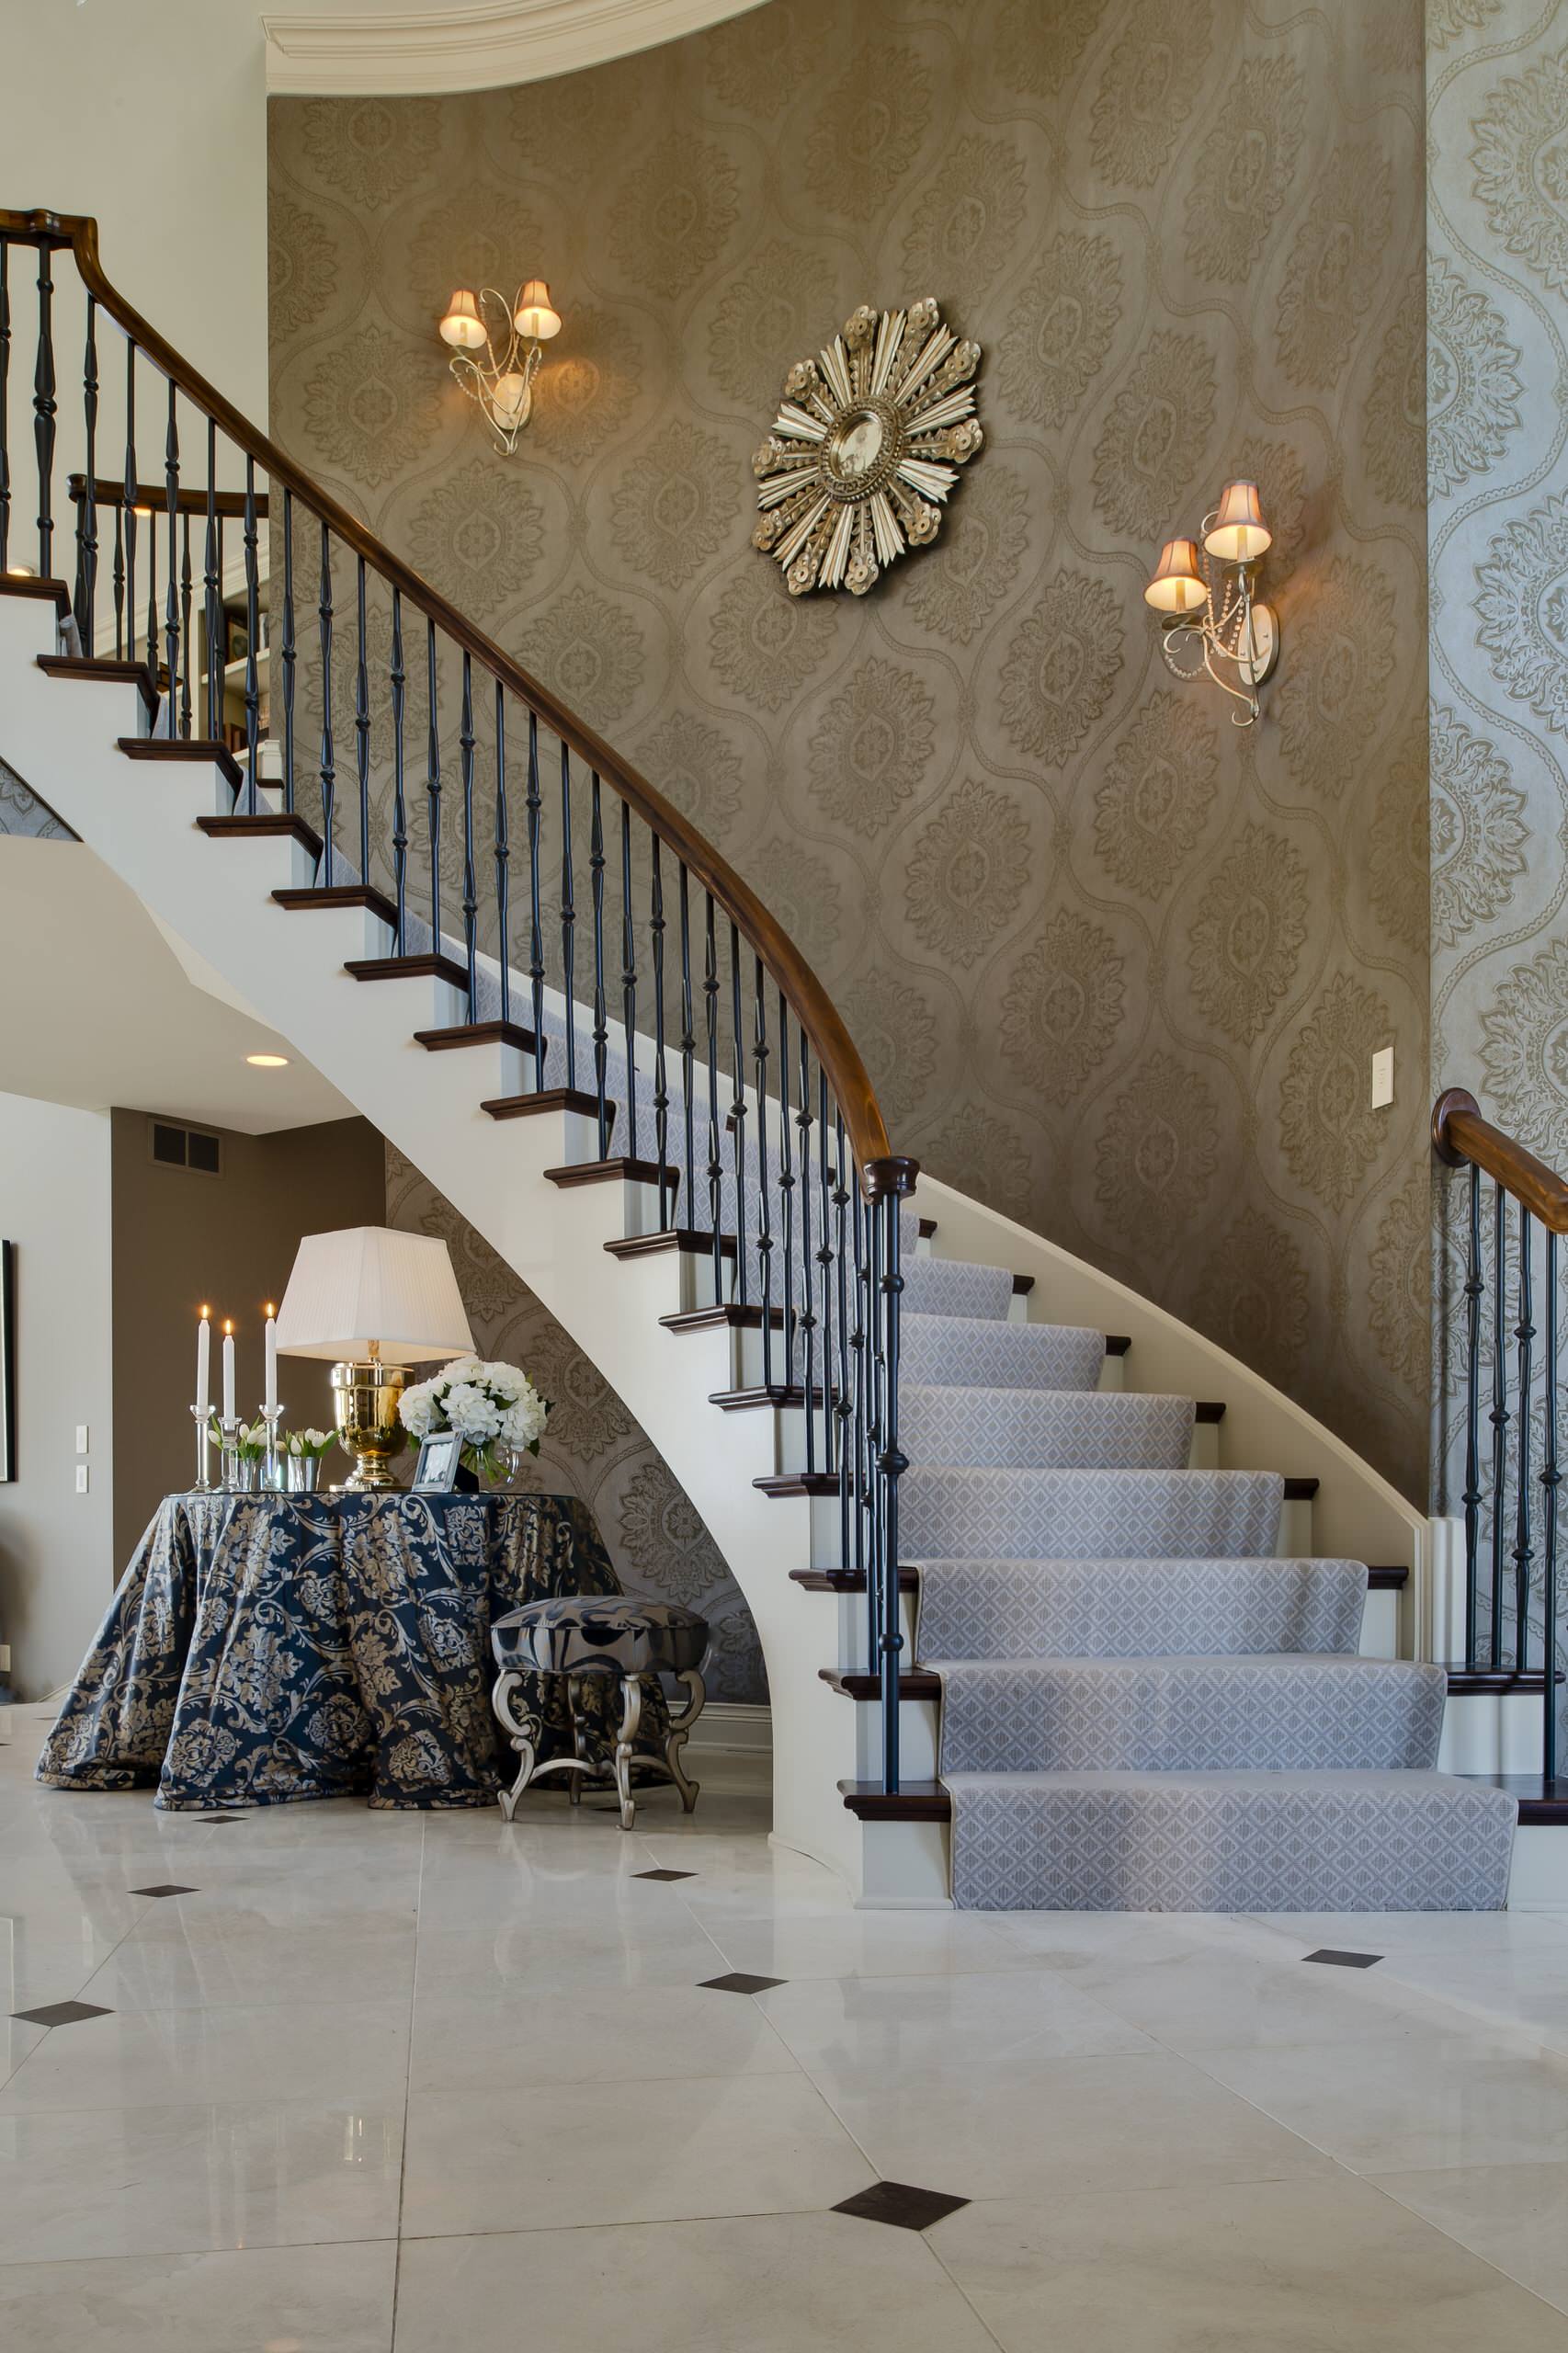 Wallpaper by Aronel on staircase wall  Wallpaper staircase Stairway  wallpaper Staircase wall